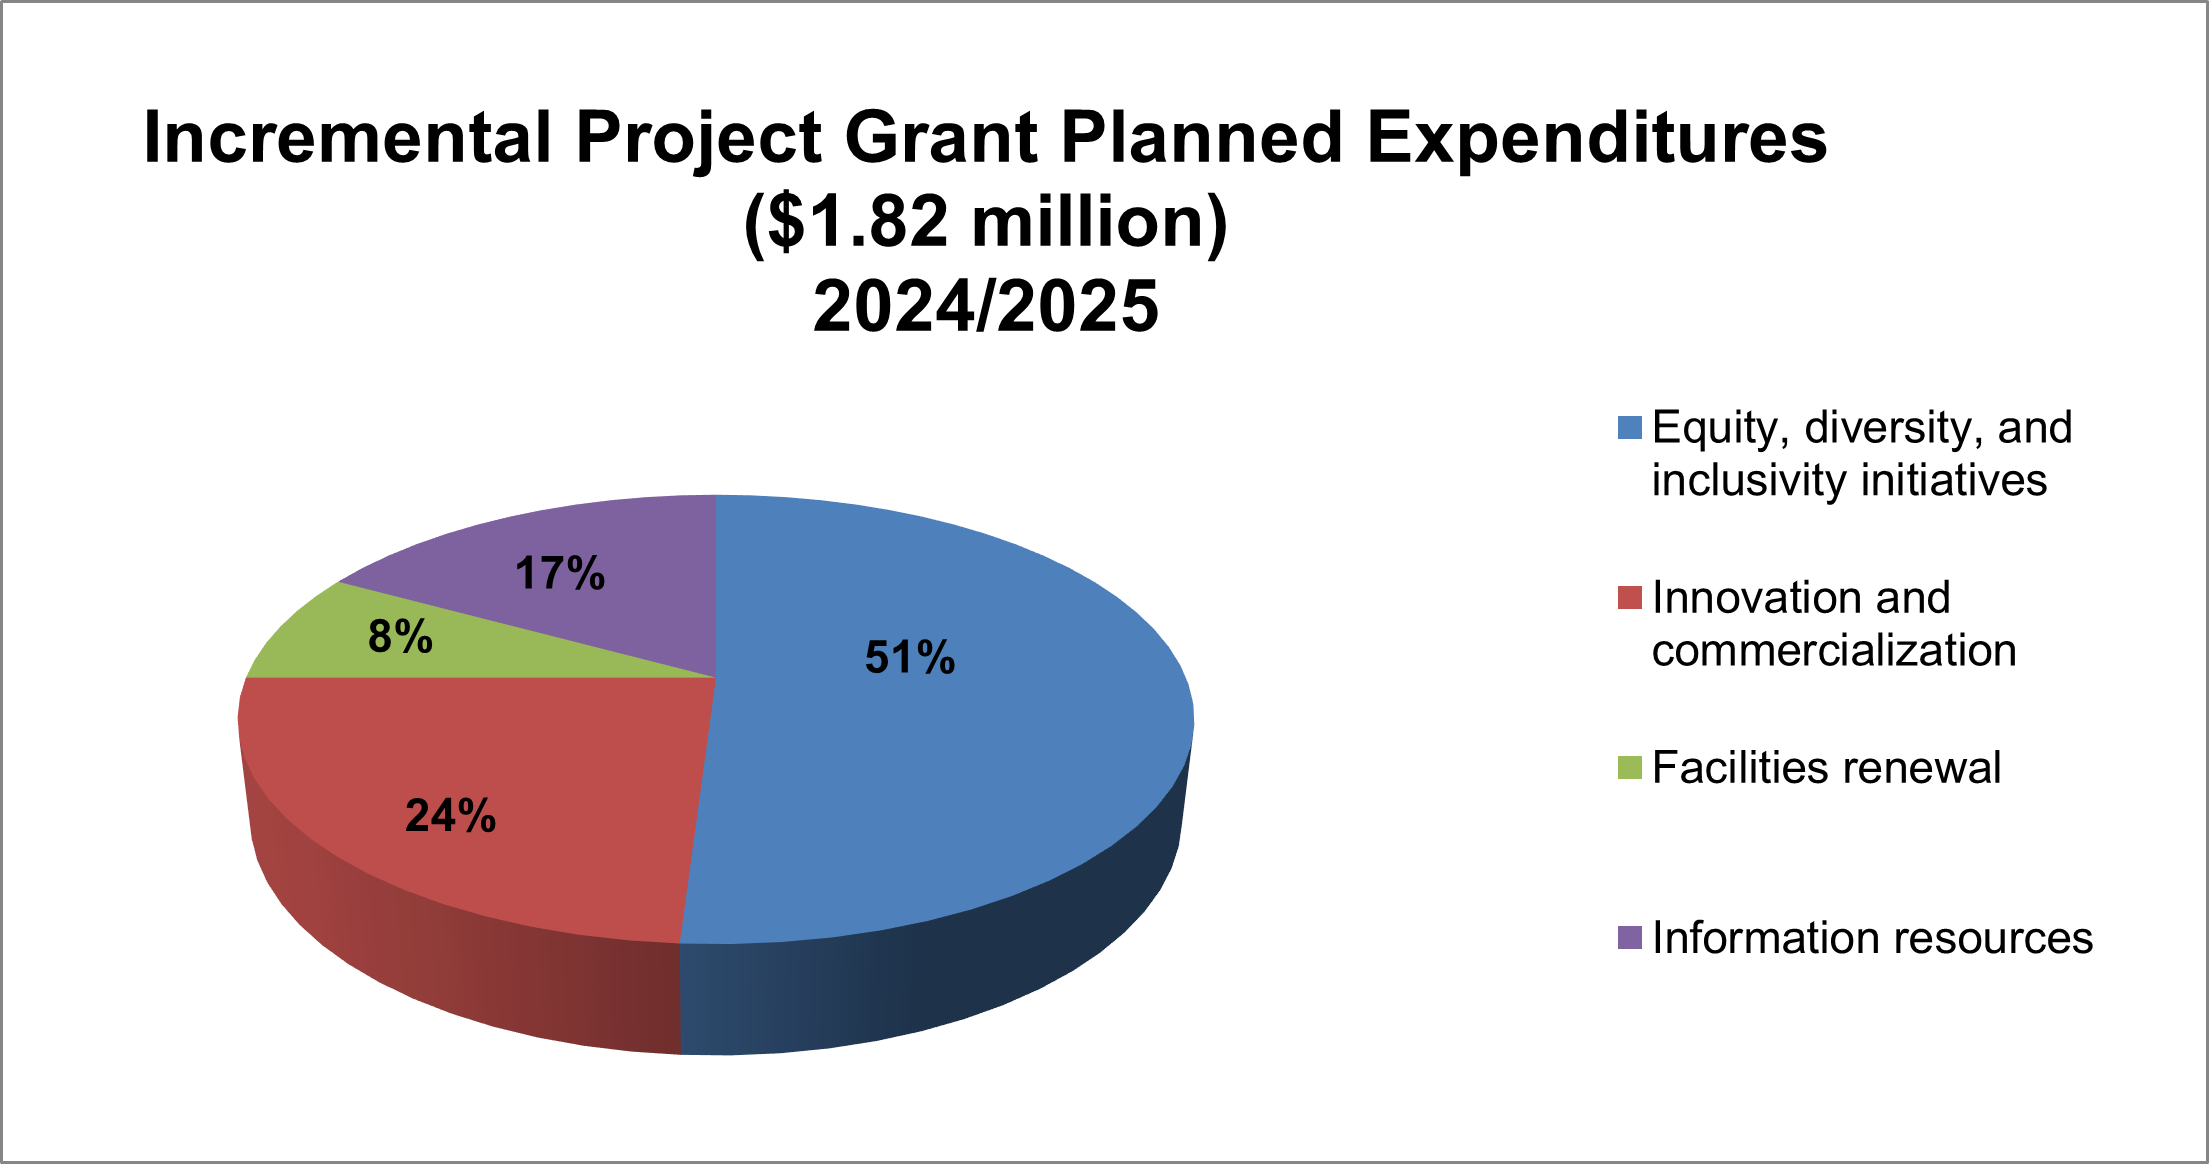 Pie chart depicting 2024/25 planned expenditures for the Incremental Project Grant in the amount of $1.82 million